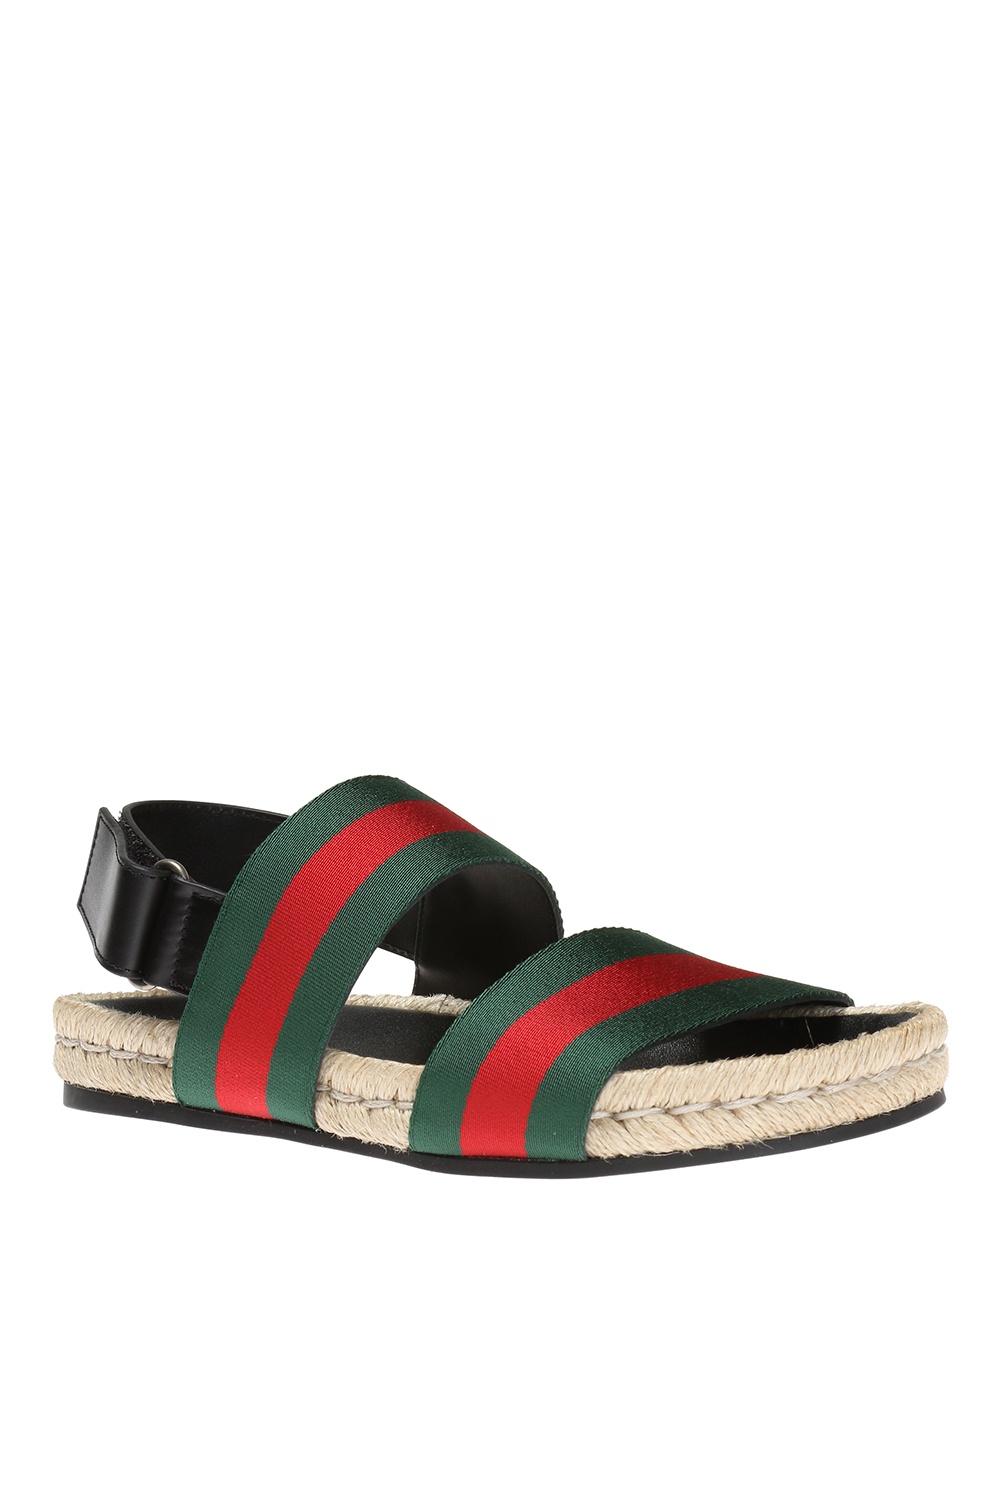 Gucci Web & Leather Thong Sandals Green/Red